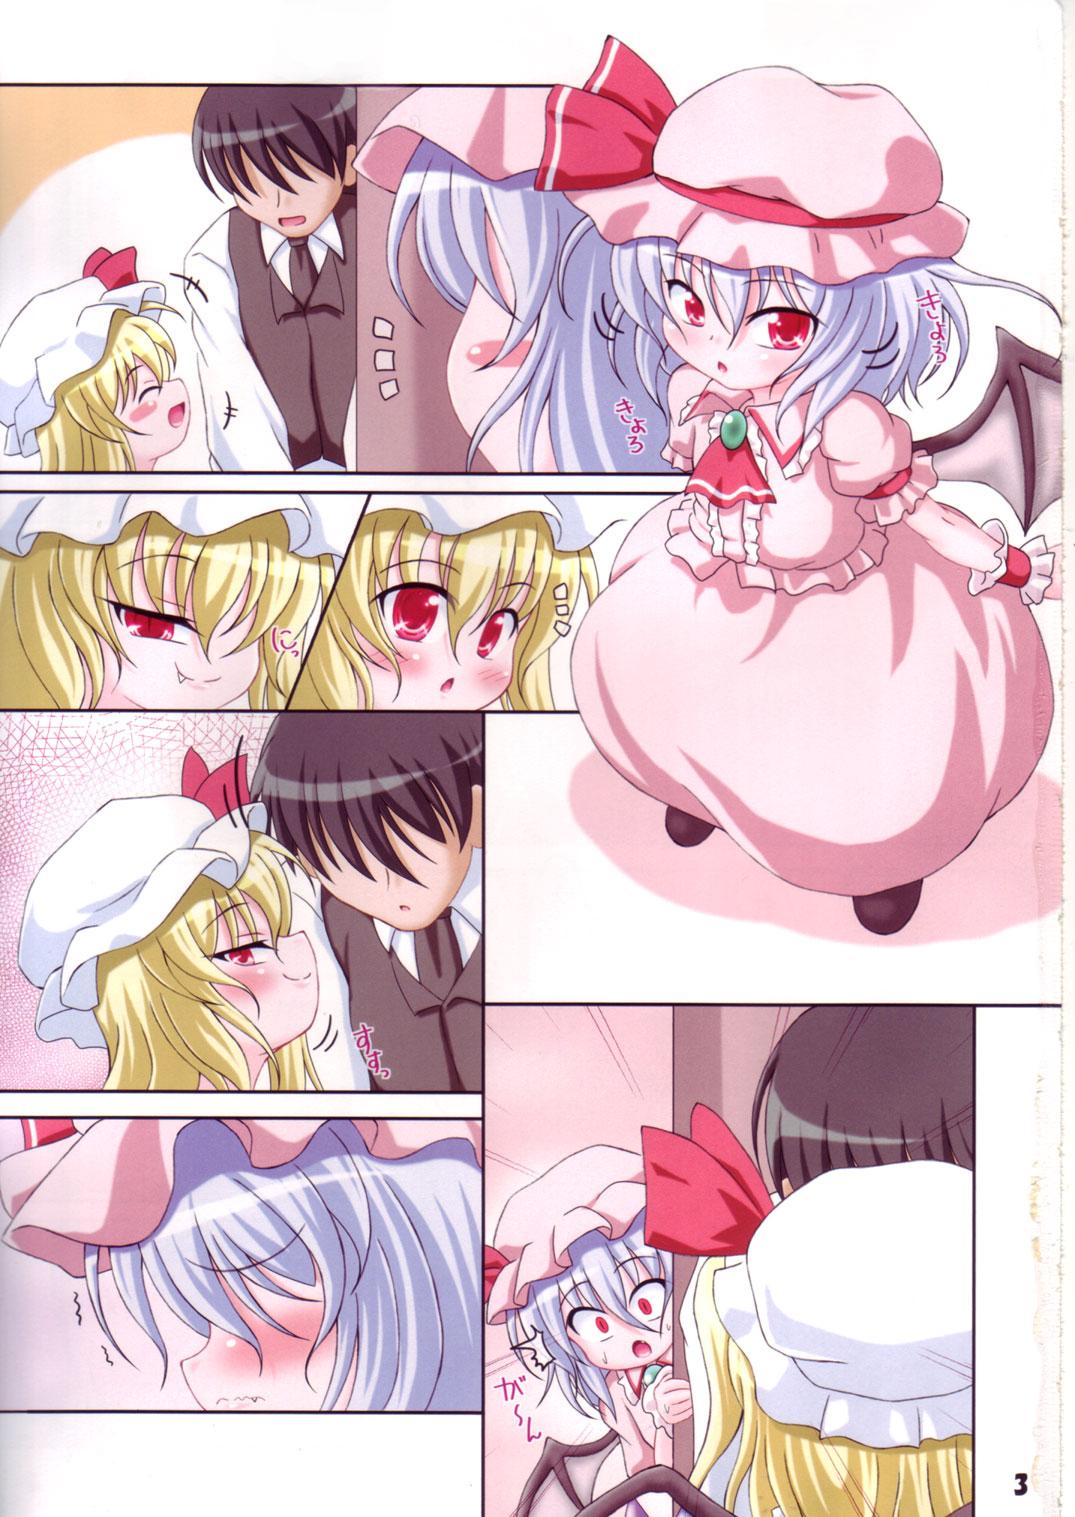 Stud Rollin 36 - Touhou project Bucetinha - Page 2